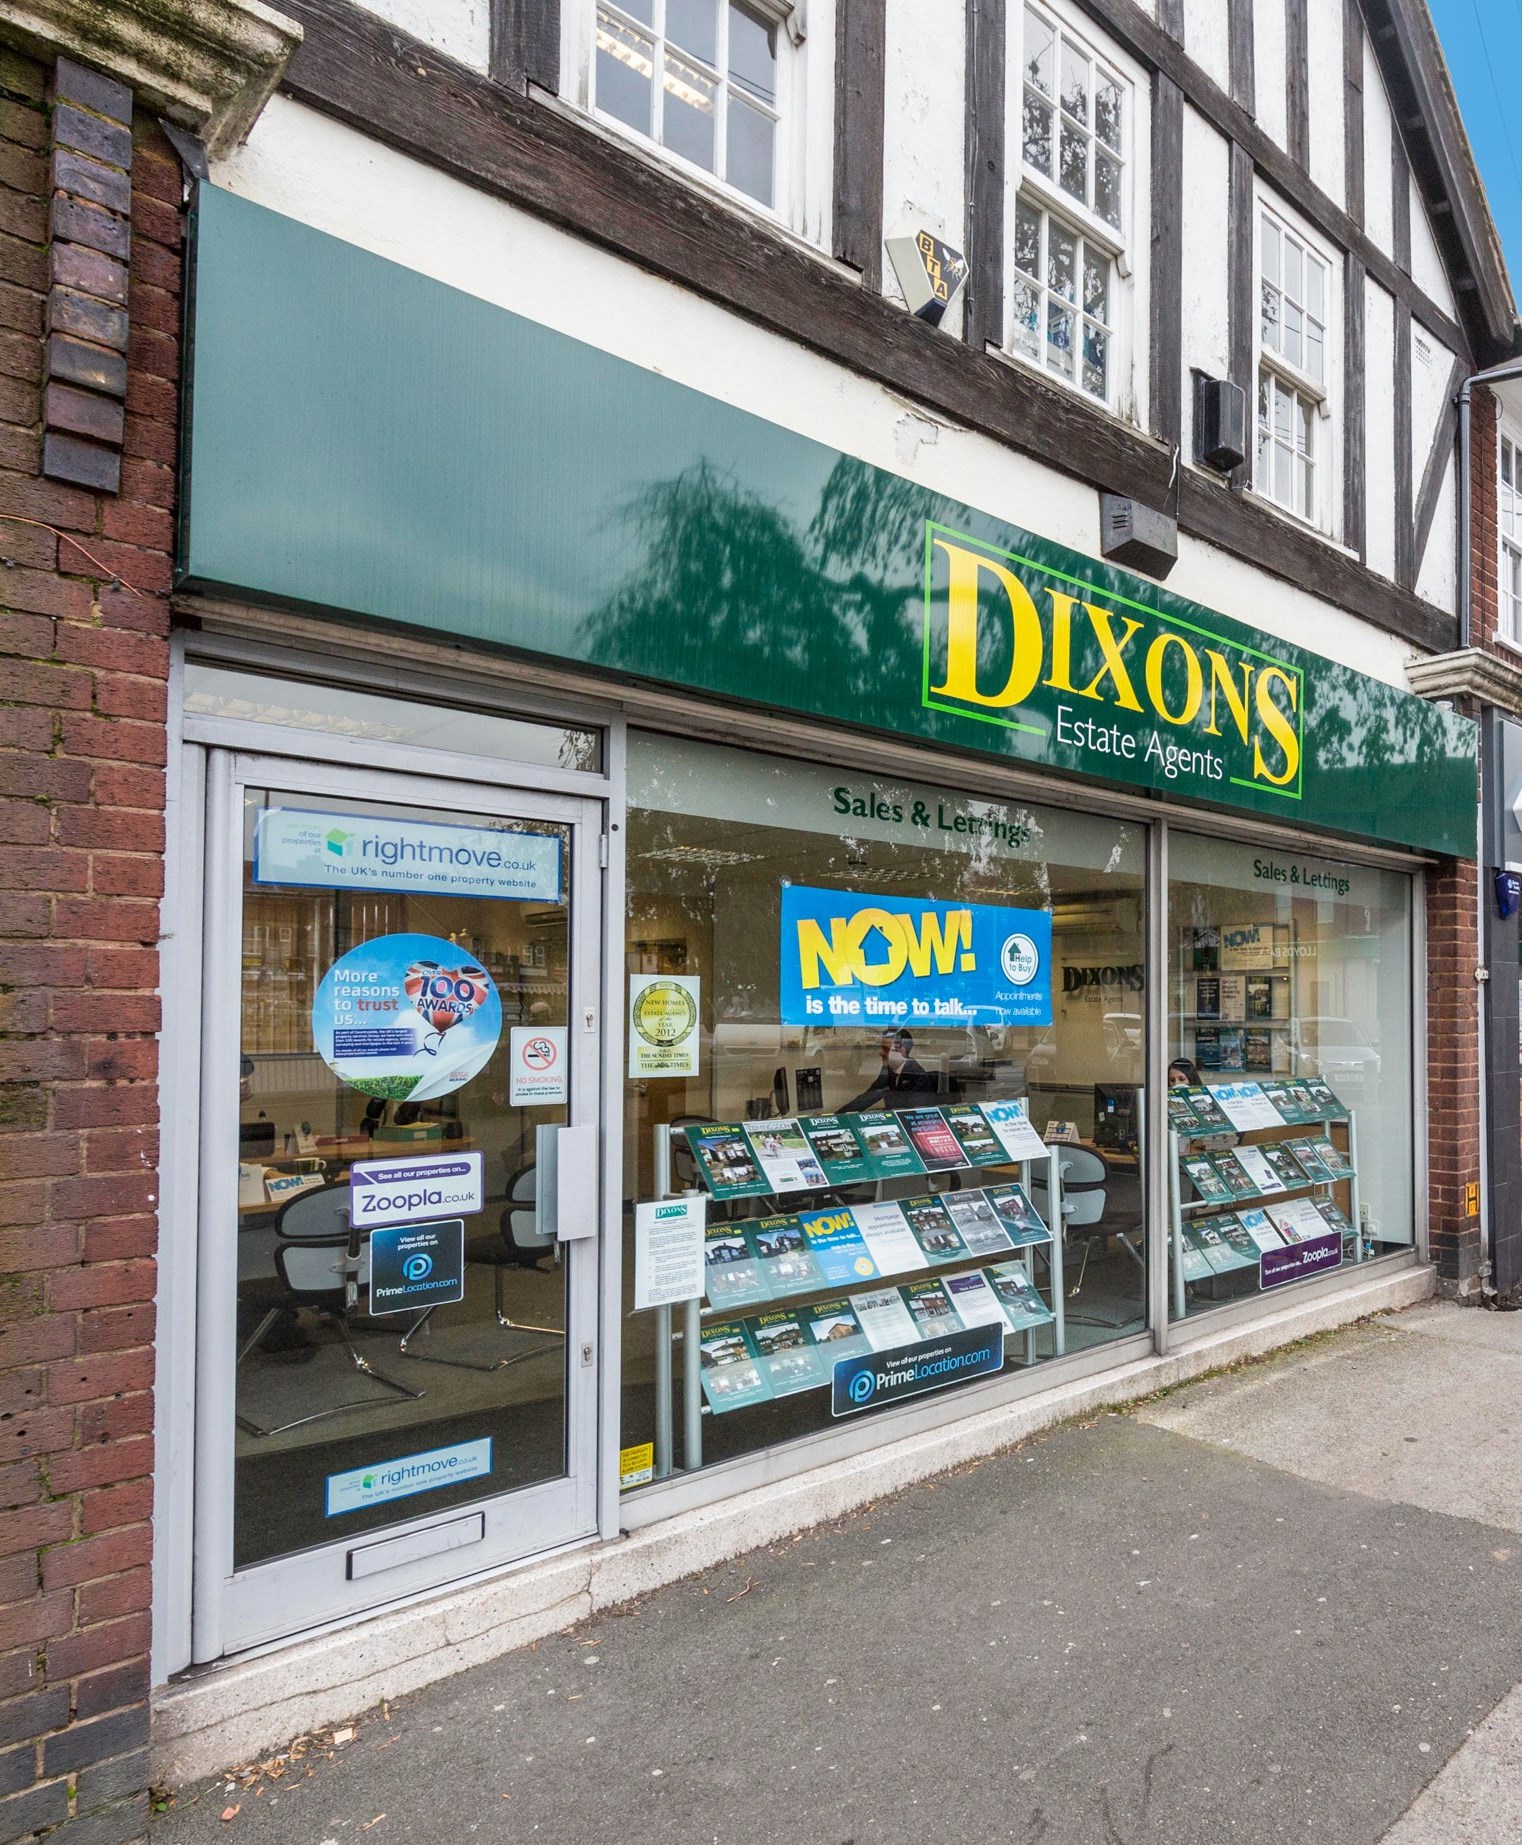 Images Dixons Sales and Letting Agents Yardley